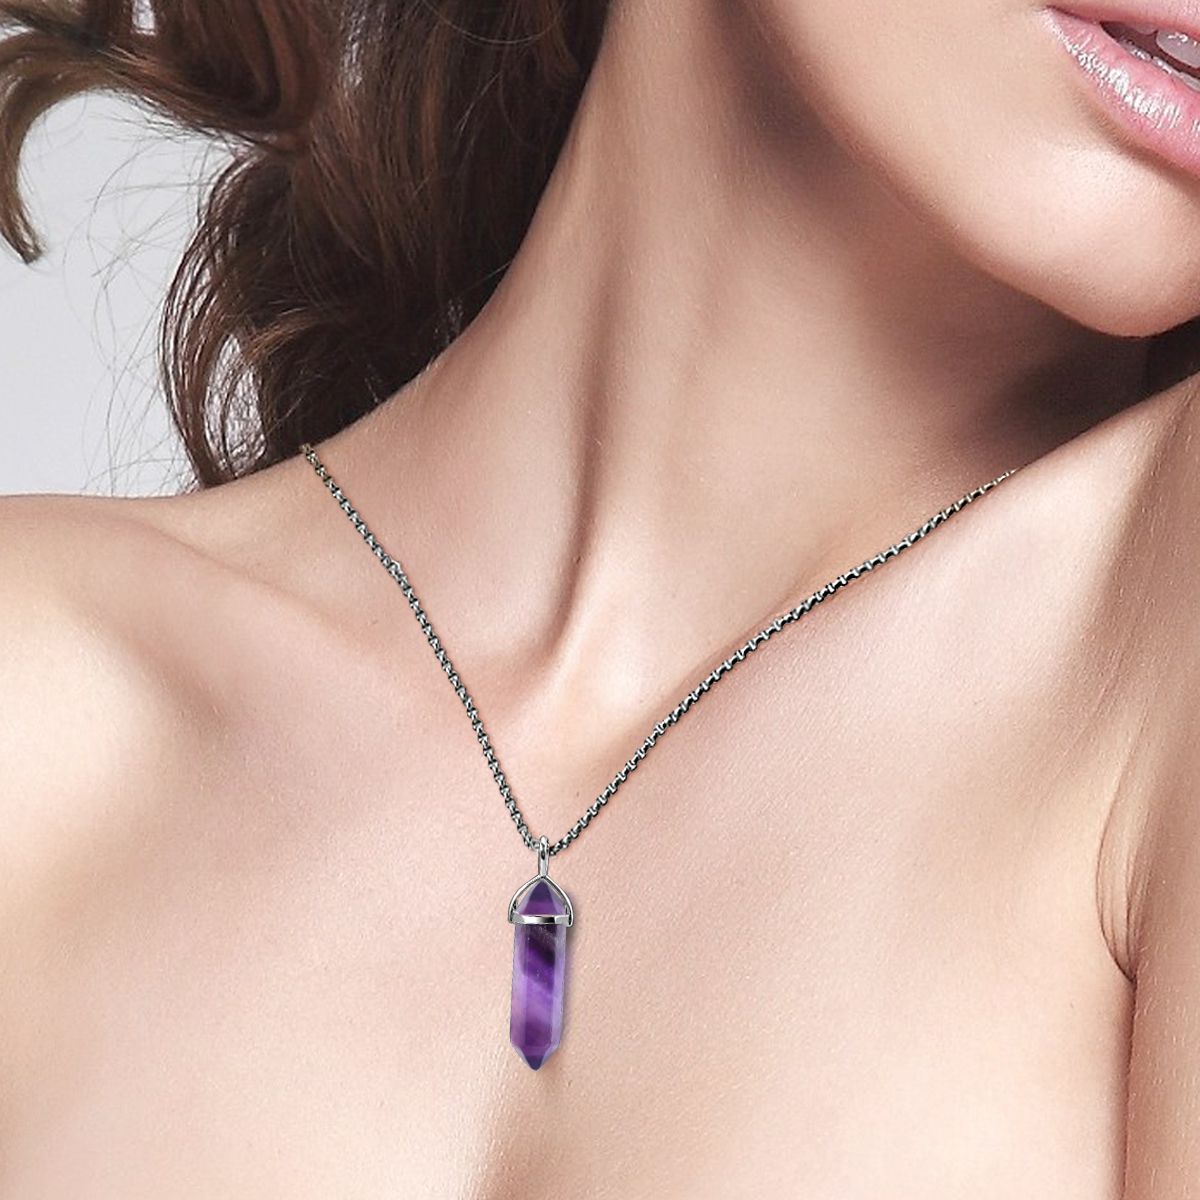 Men's Amethyst Necklace, Purple Stone Pendant, Anxiety Jewelry, Stress  Relief Gifts - Etsy